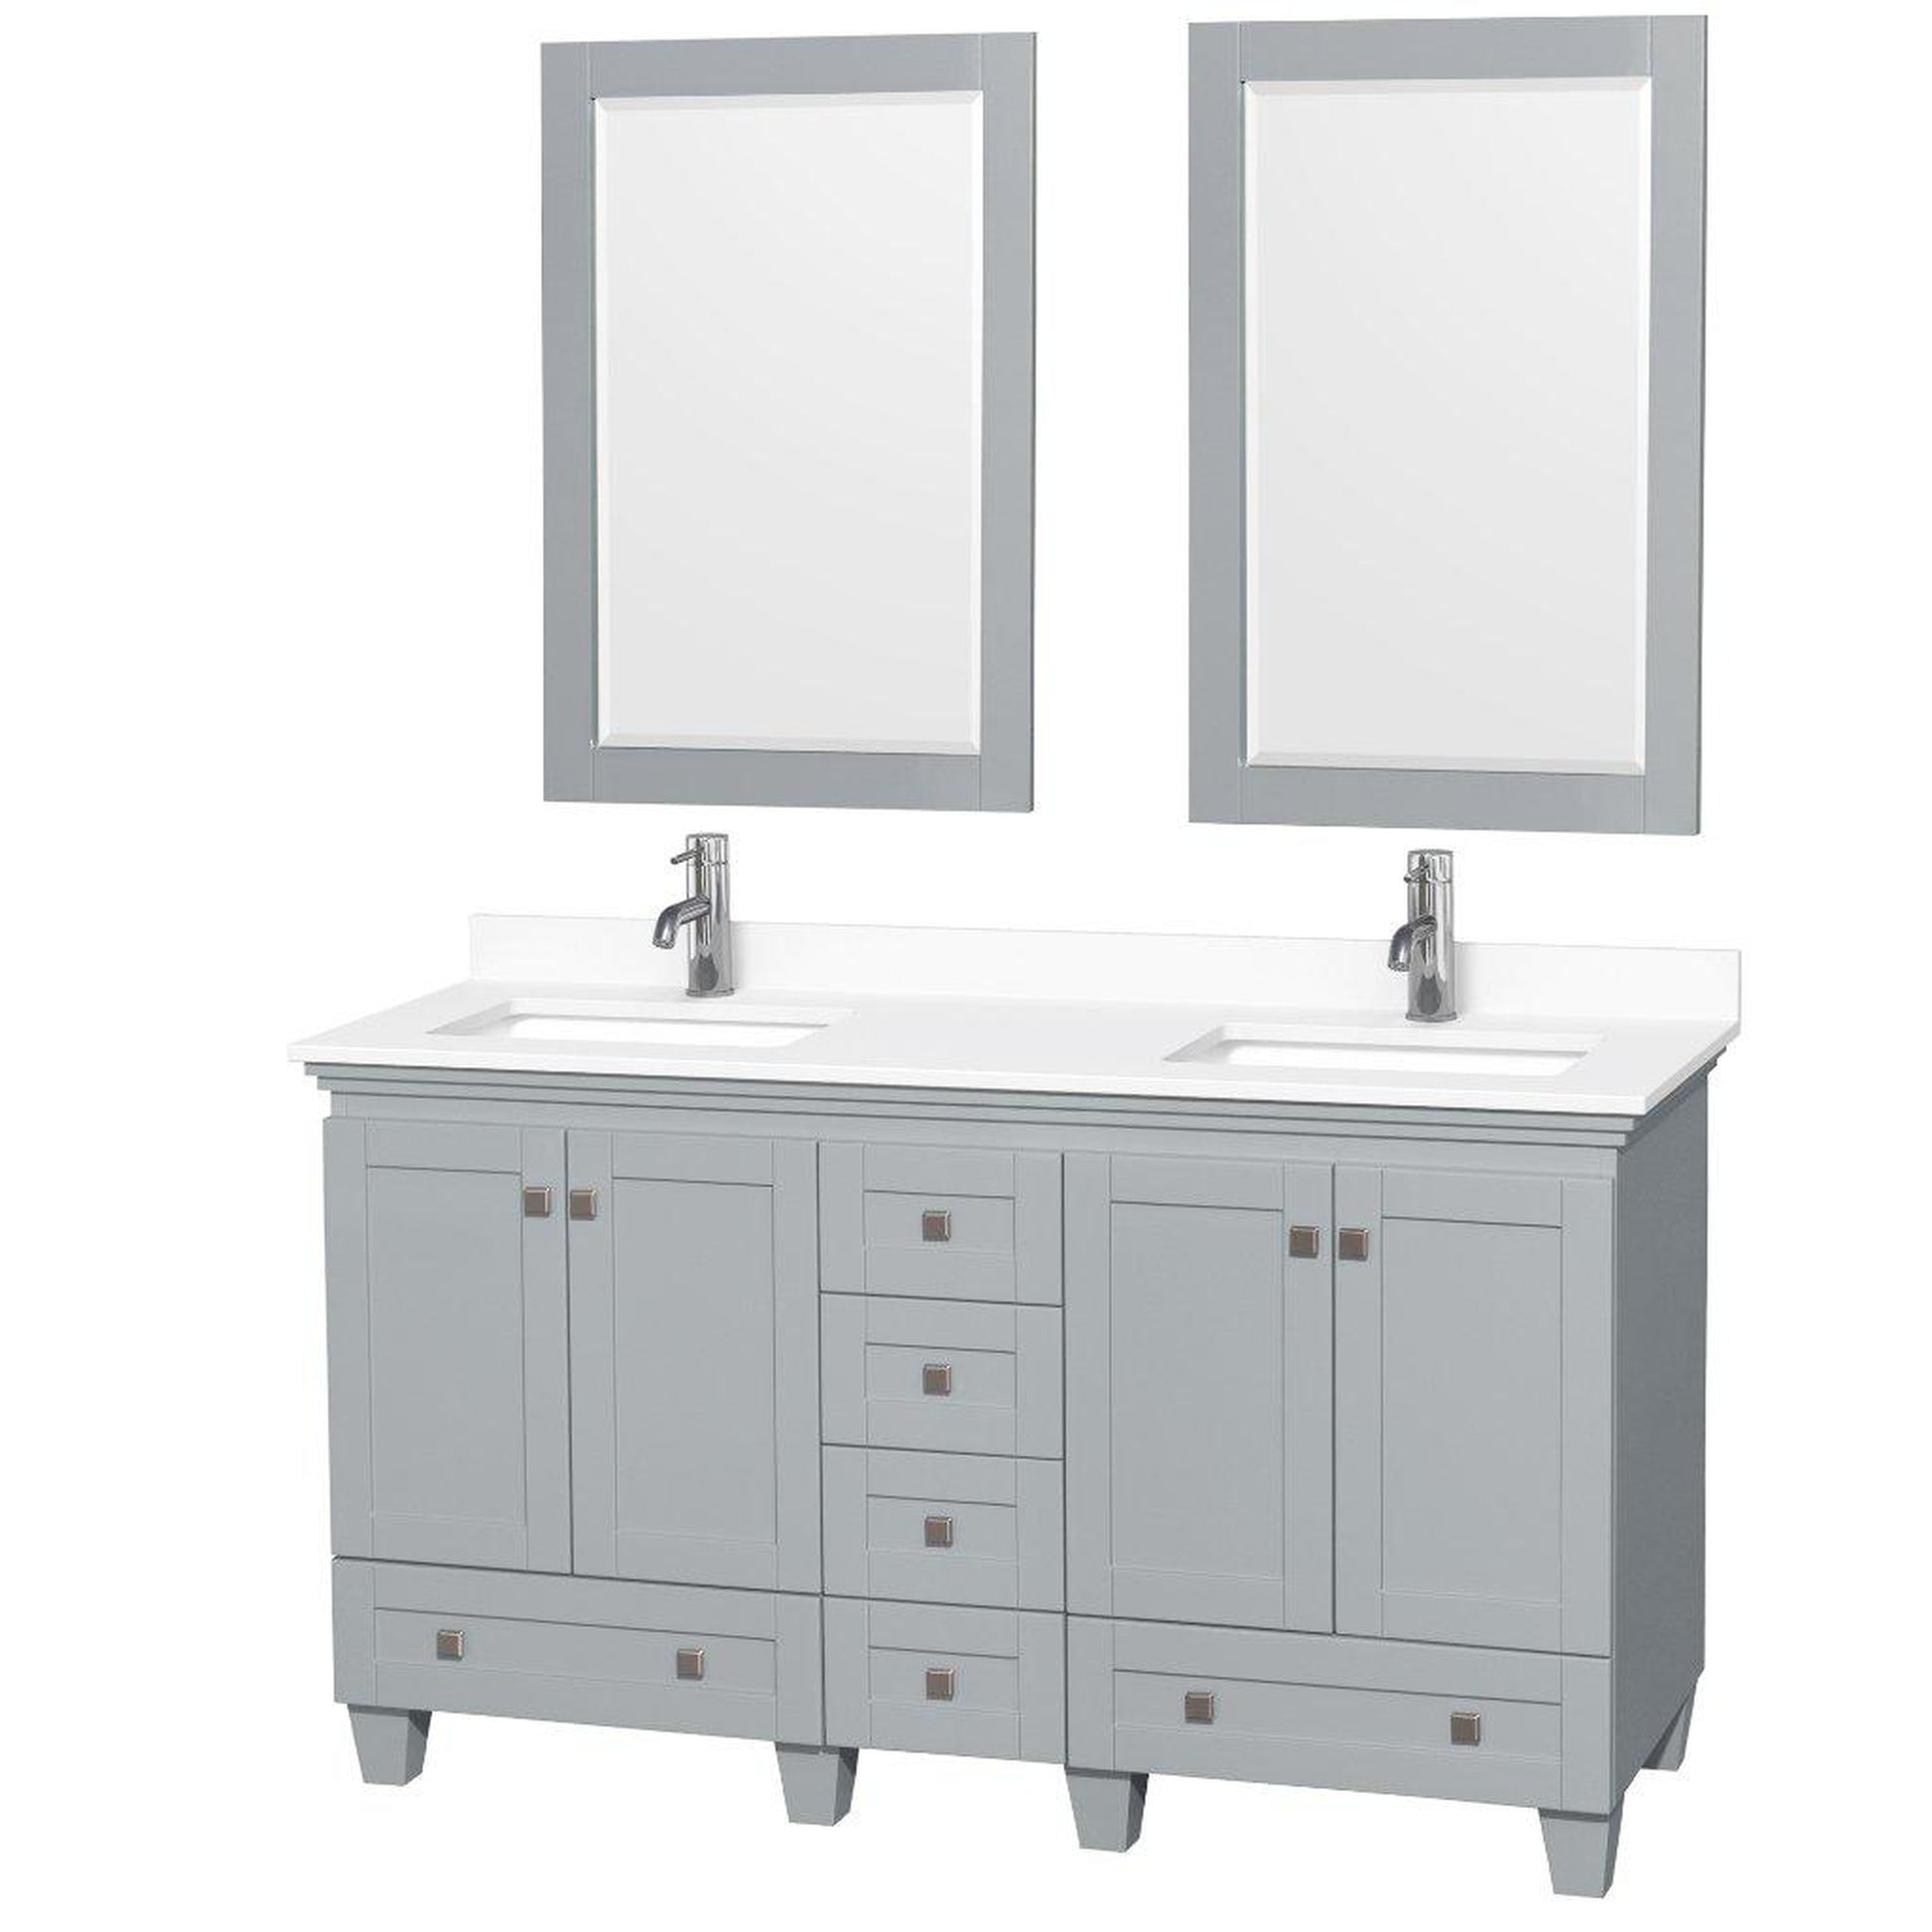 Wyndham Collection Acclaim 60" Double Bathroom Oyster Gray Vanity With White Cultured Marble Countertop And Undermount Square Sinks And 2 Set Of 24" Mirror